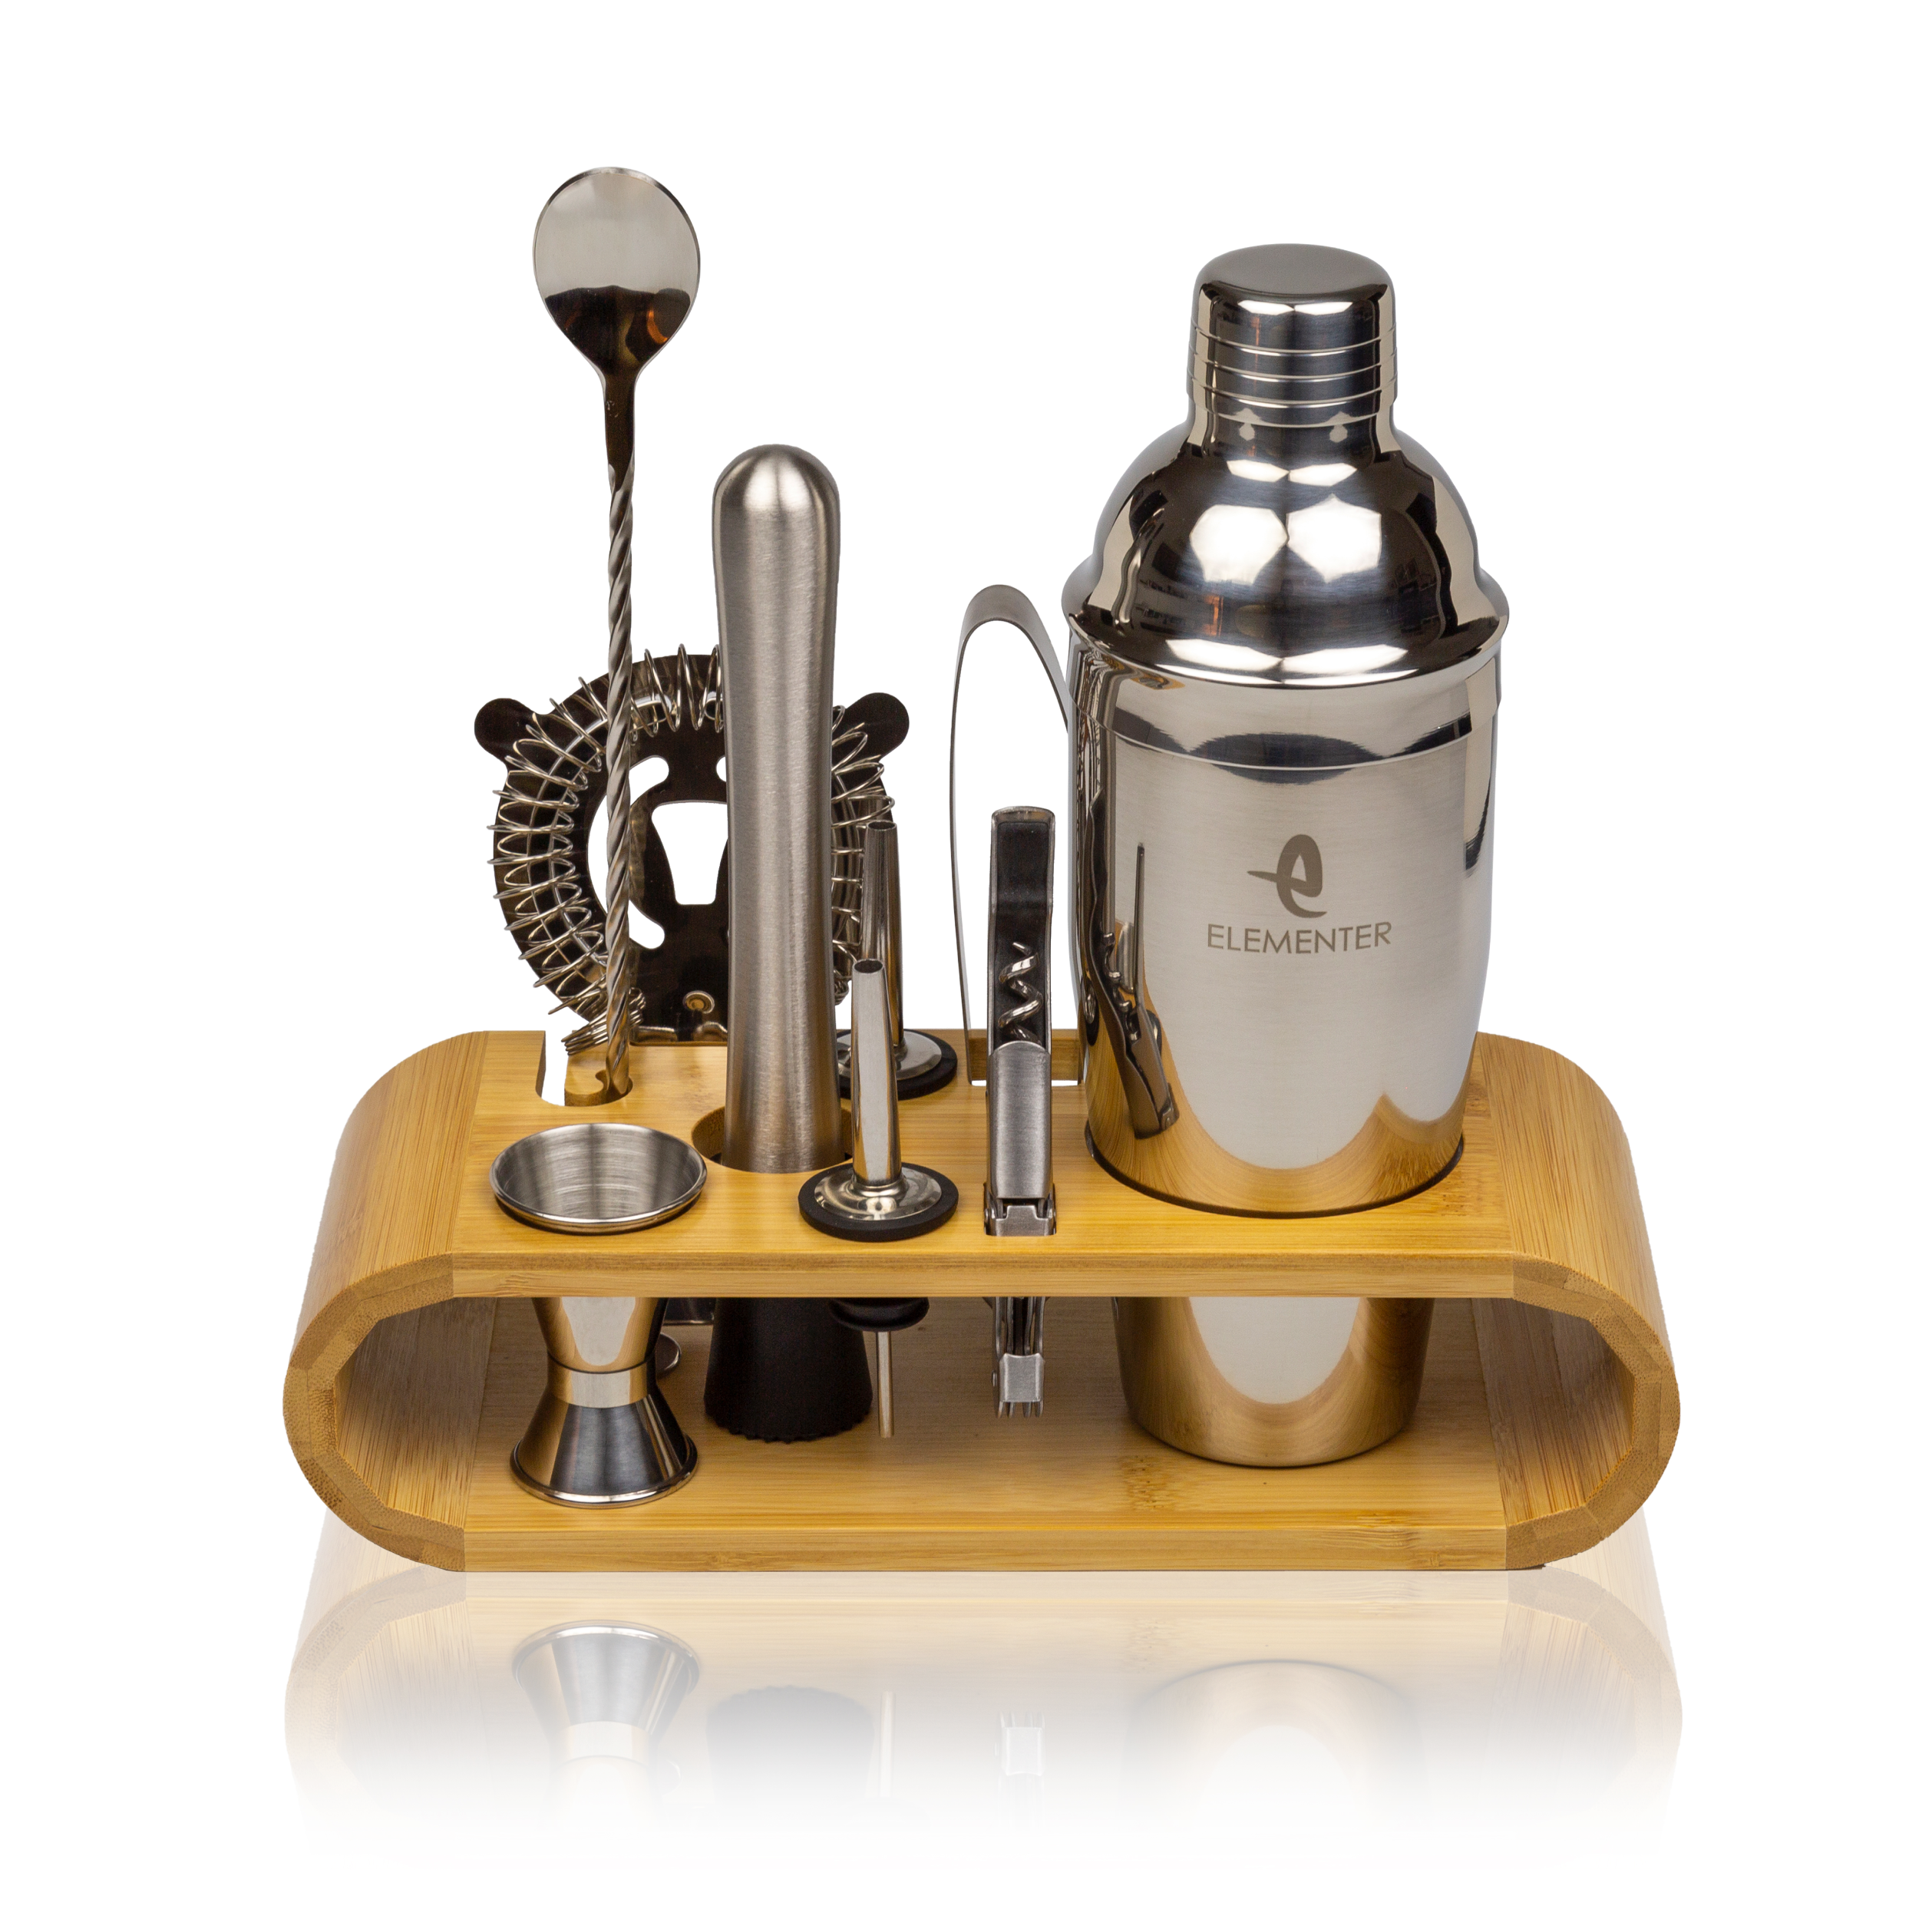 ELEMENTER Cocktail Shaker Set - Mixologist Bartender kit 10-Piece, Crafted  from Stainless Steel, All The Accessories You Need to Mix The Perfect Drink